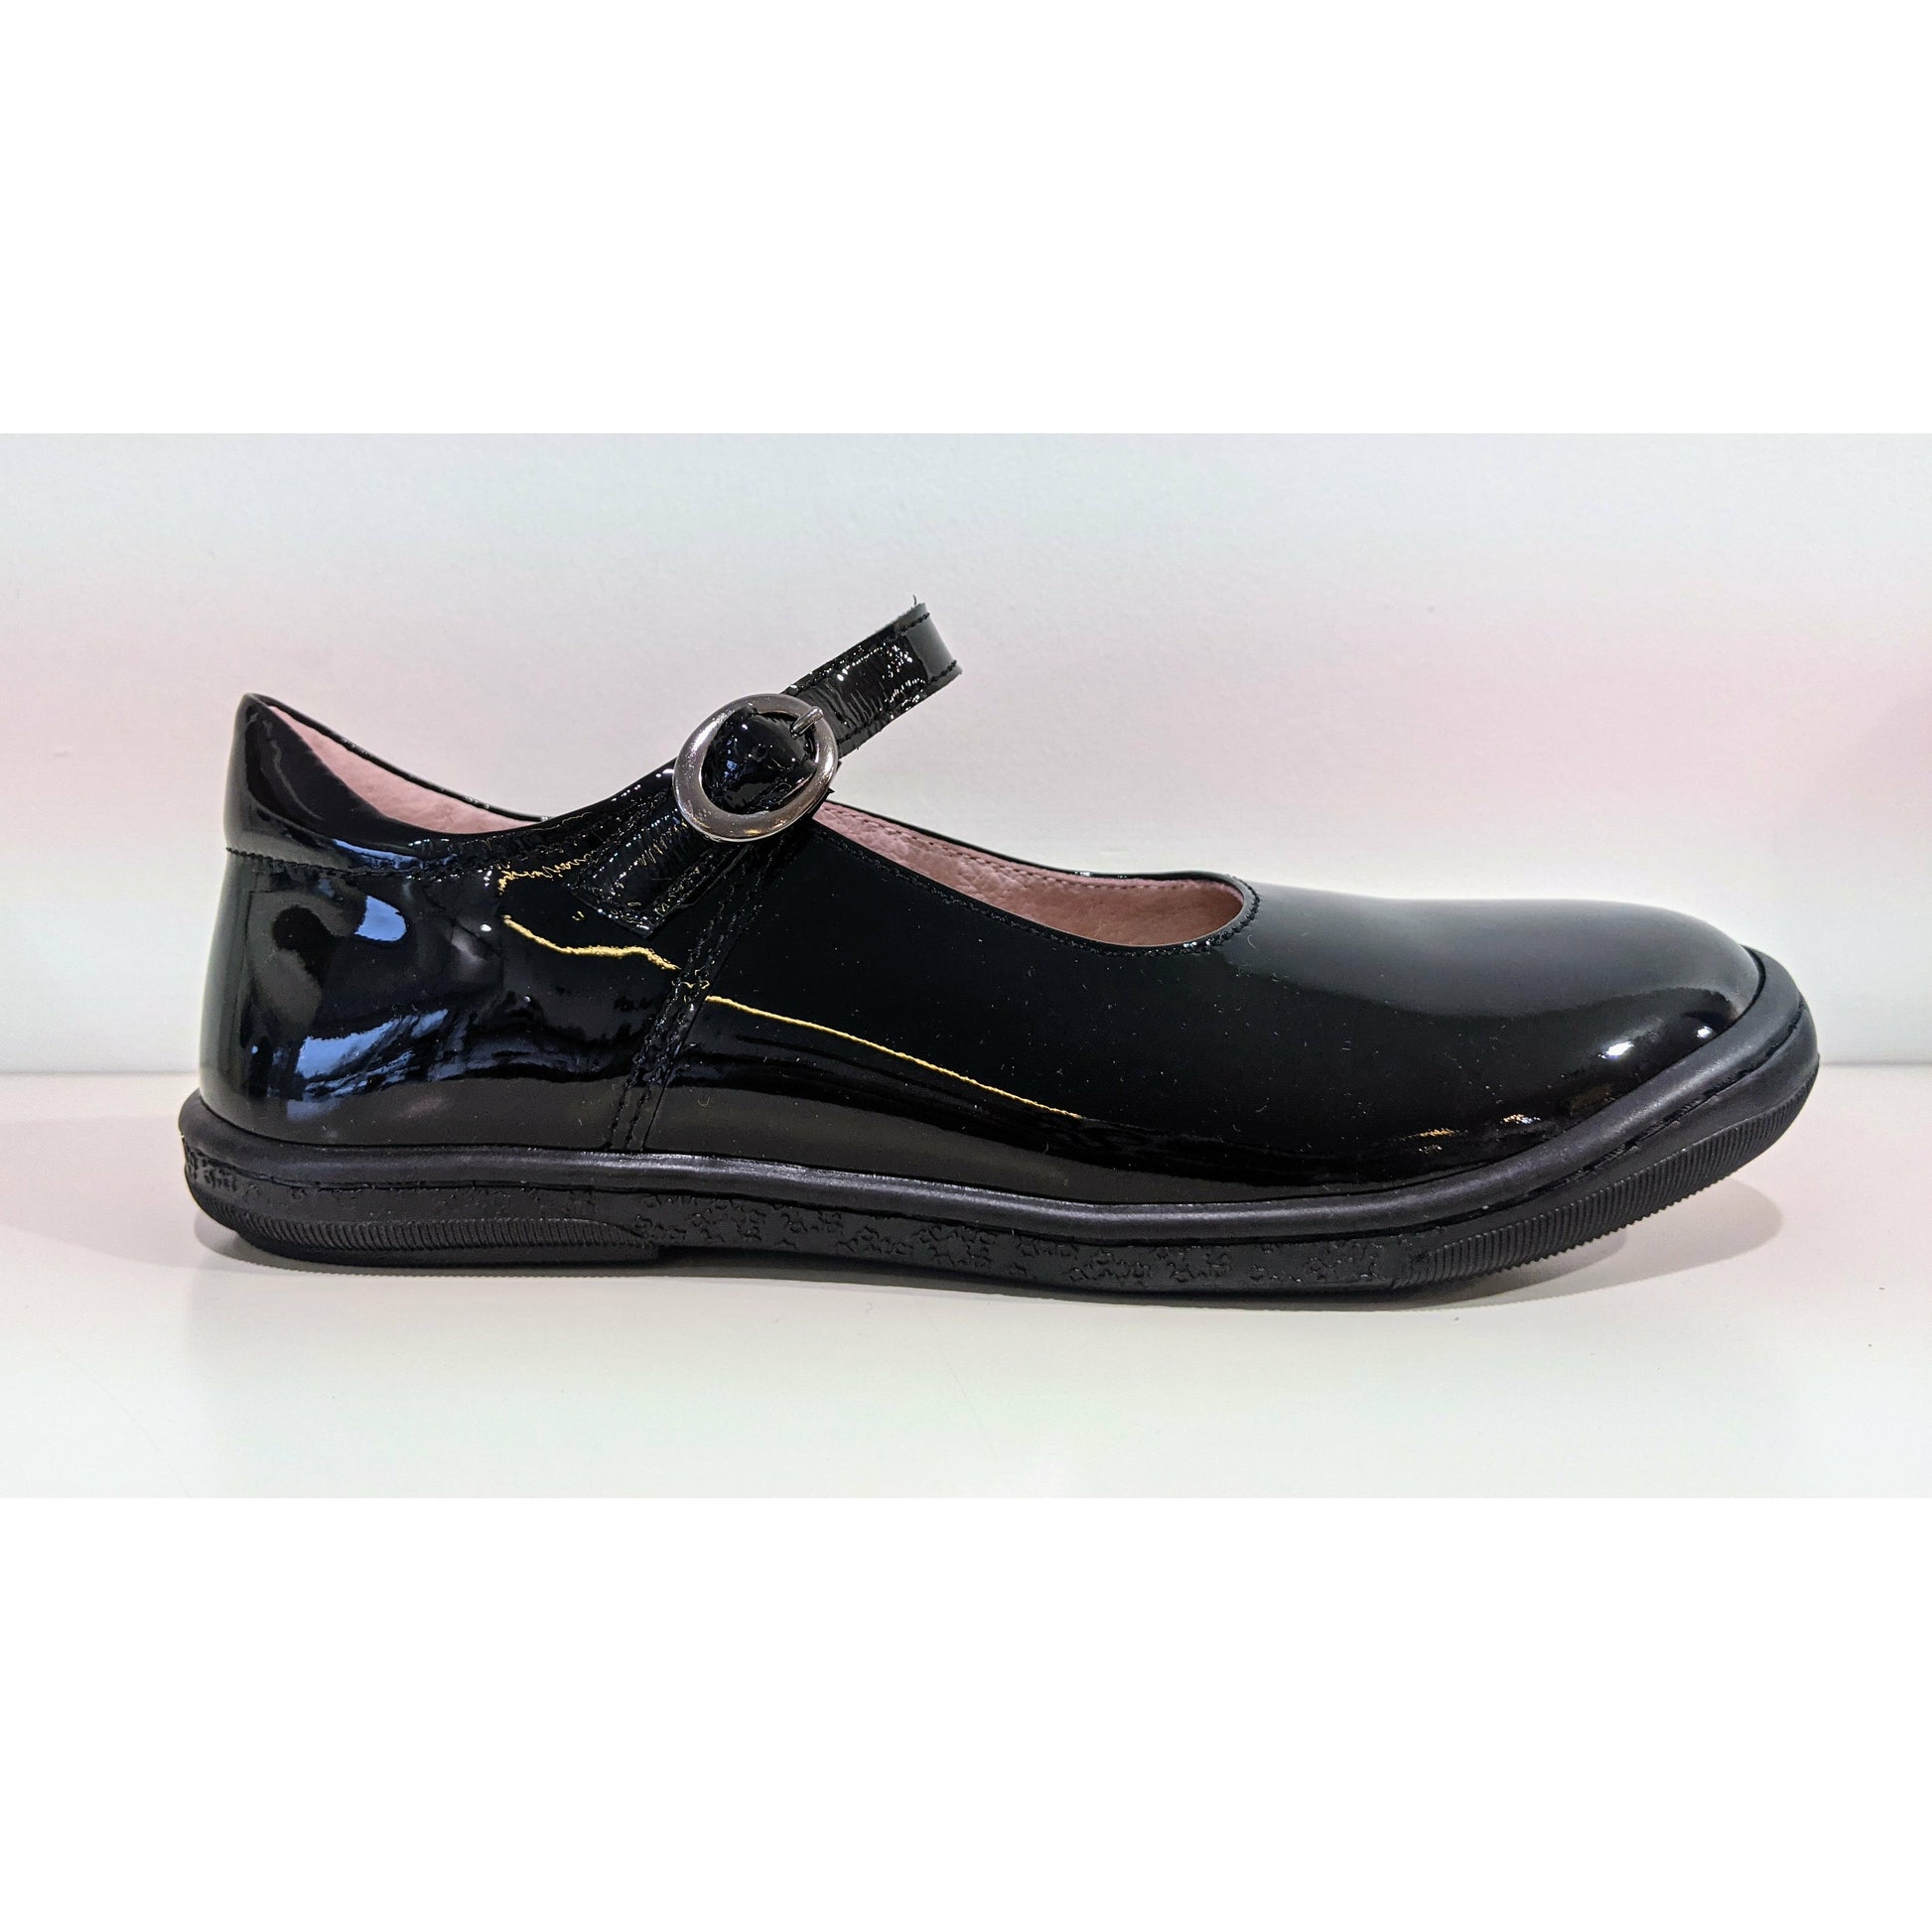 A girls Mary Jane school shoe by Petasil, style Balbina, in black with buckle fastening. Right side view.